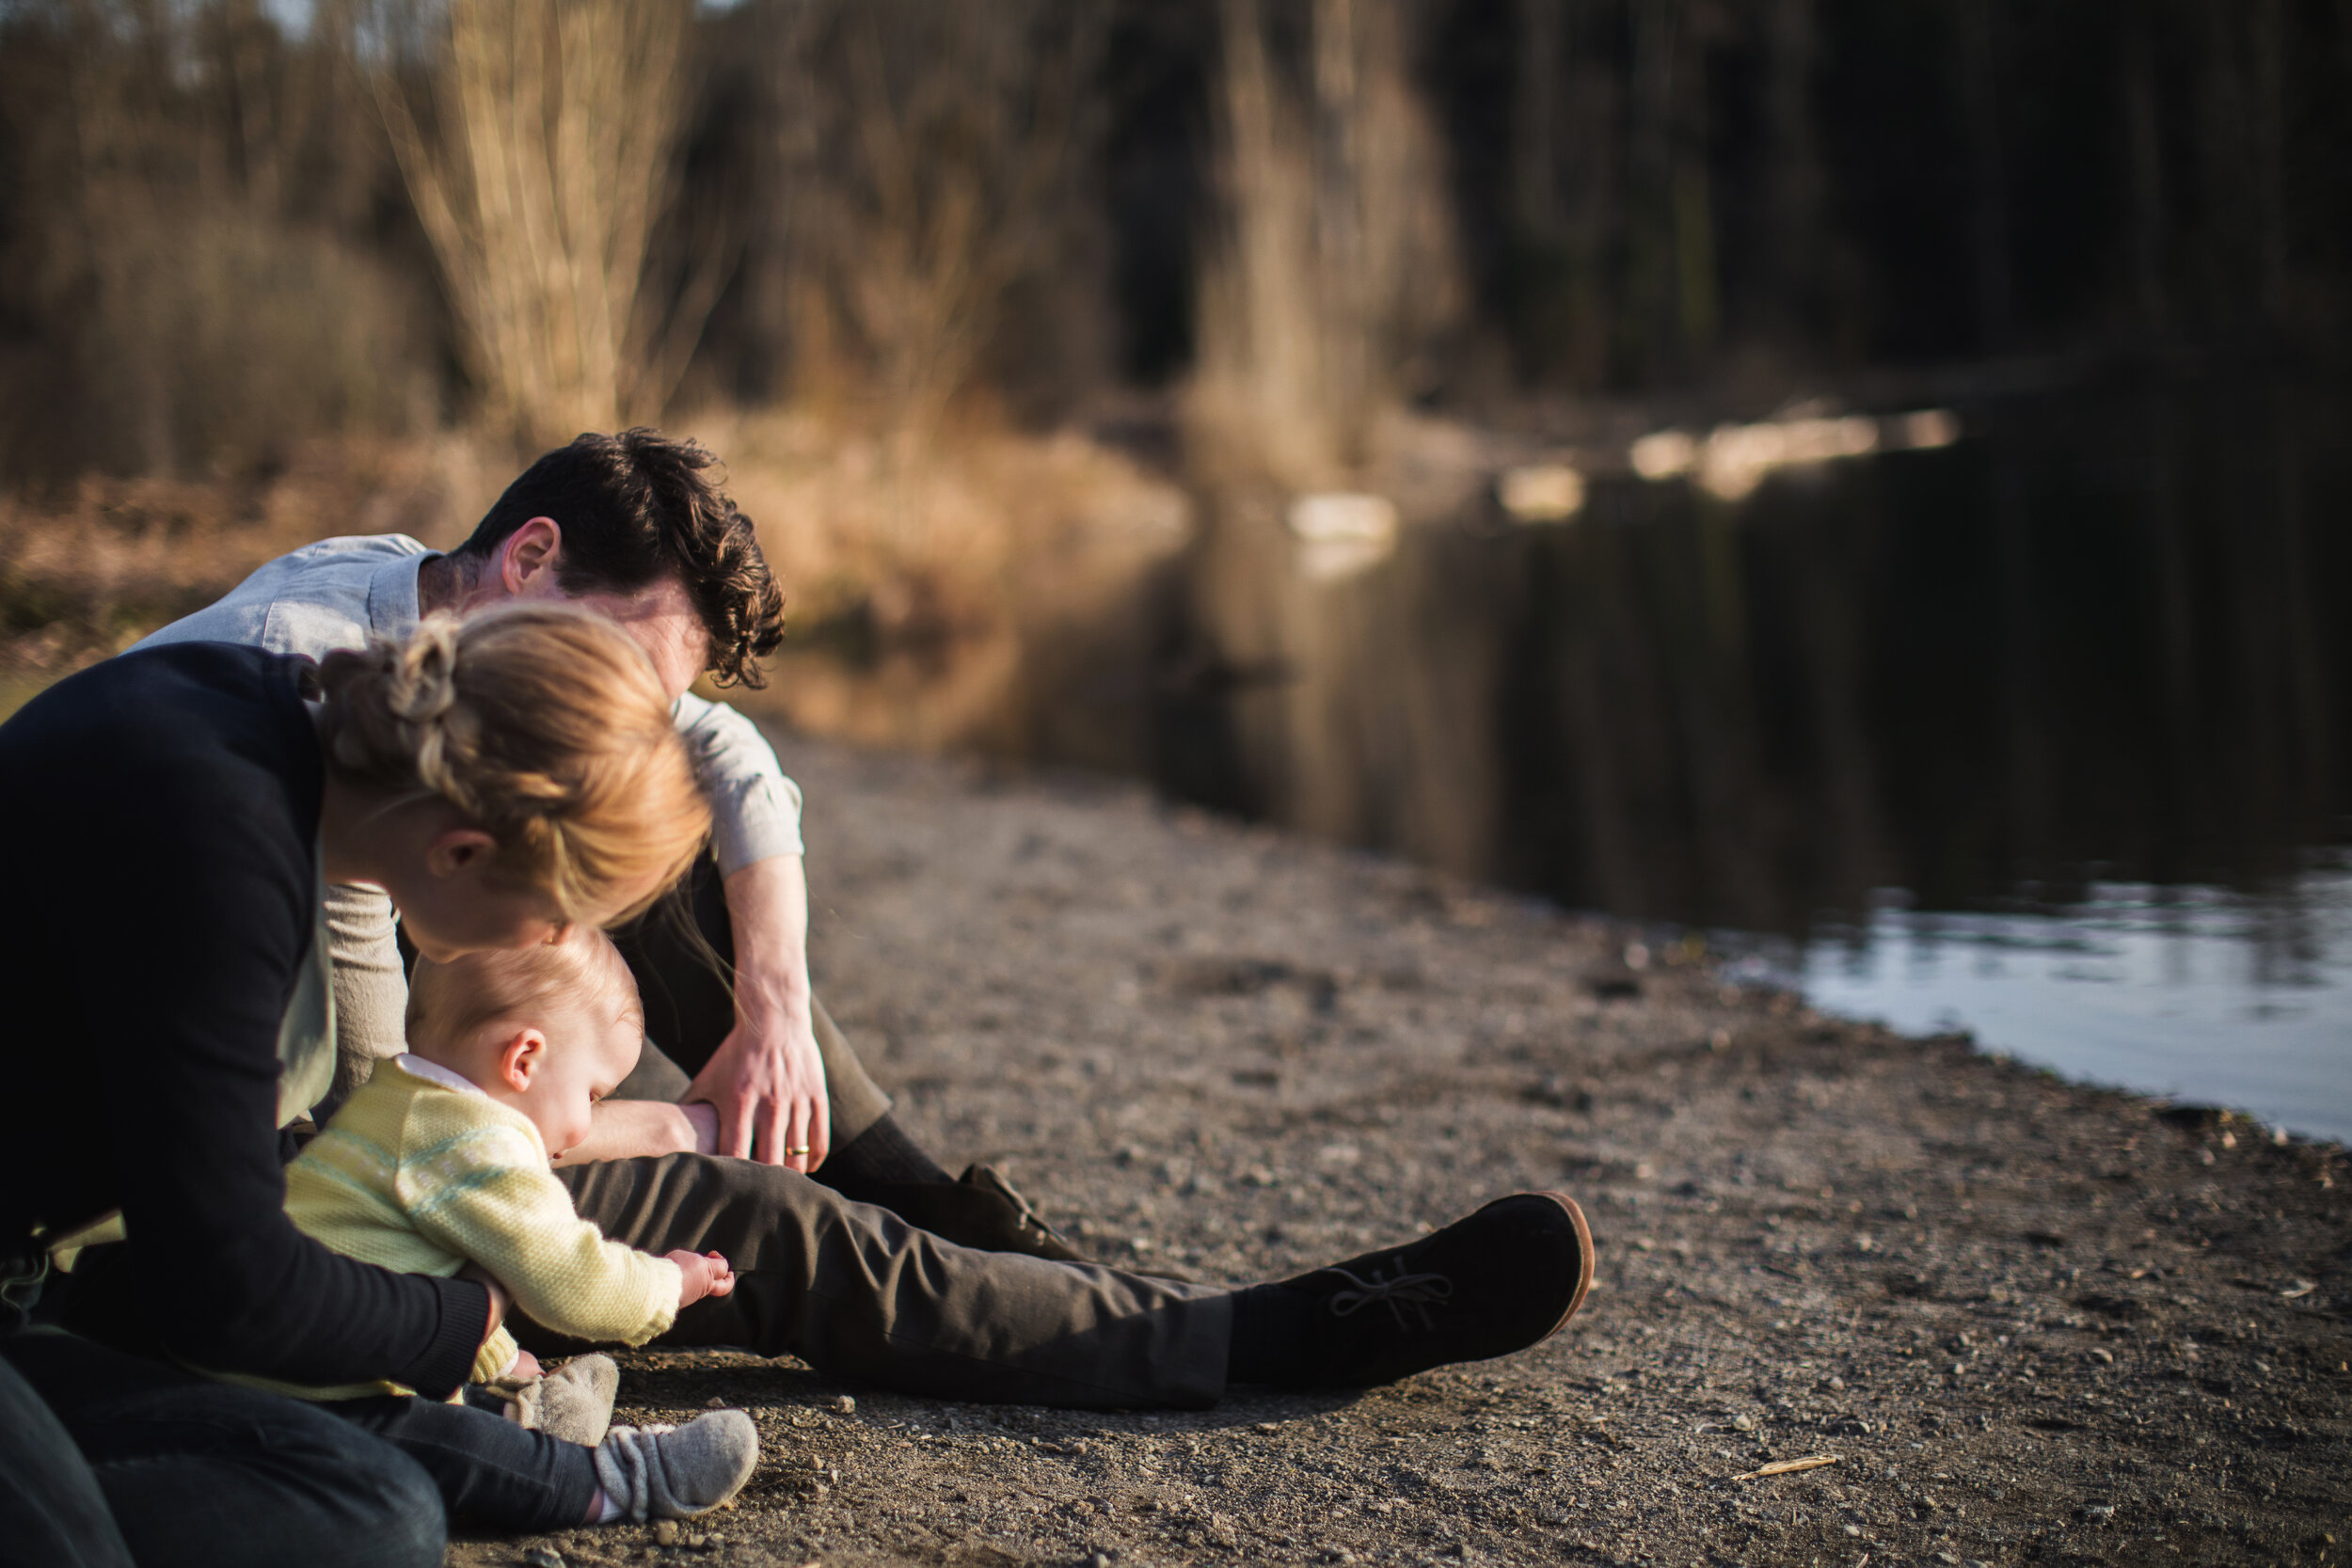 Full sun photo from a Seattle family outdoor photography session